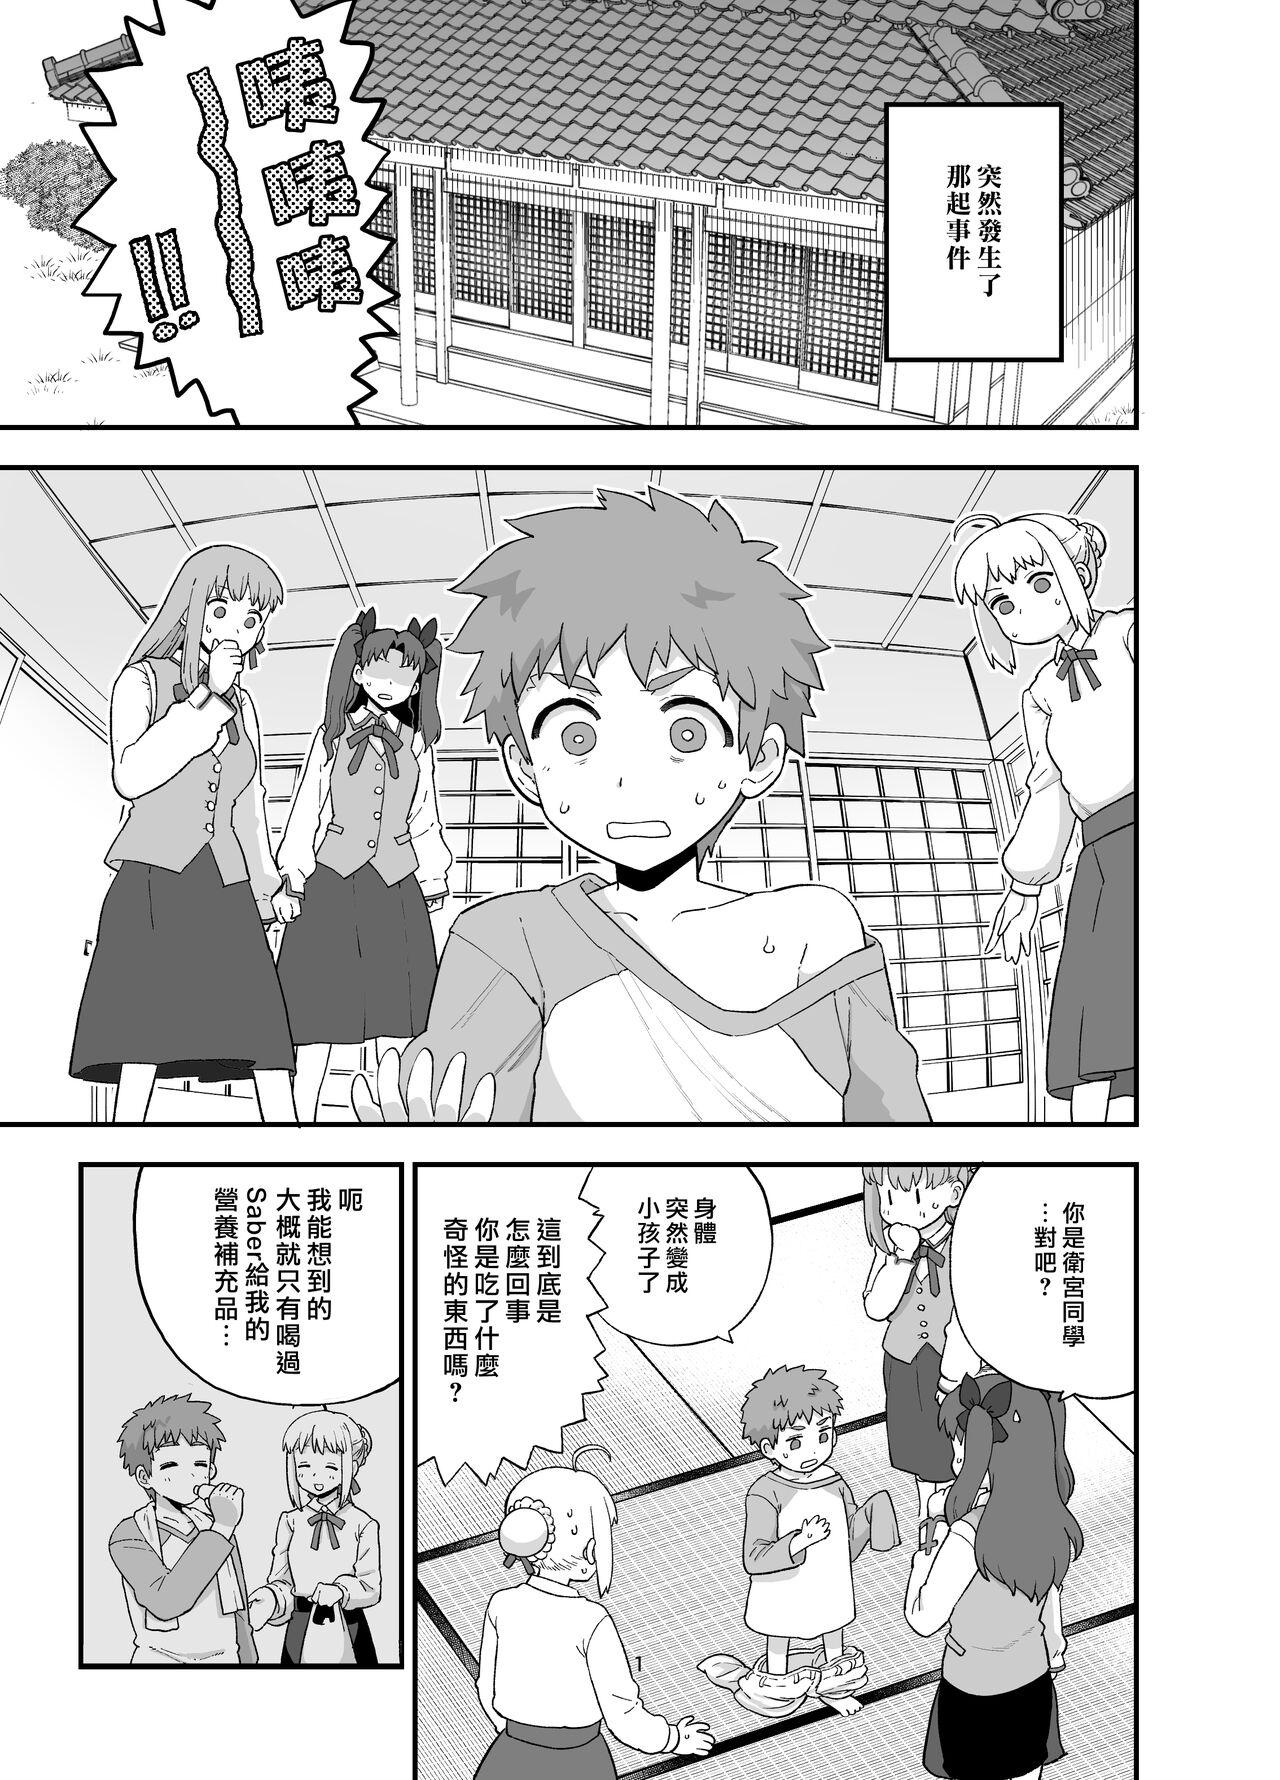 Culos Rider-san to Orusuban - Fate stay night Firsttime - Page 4